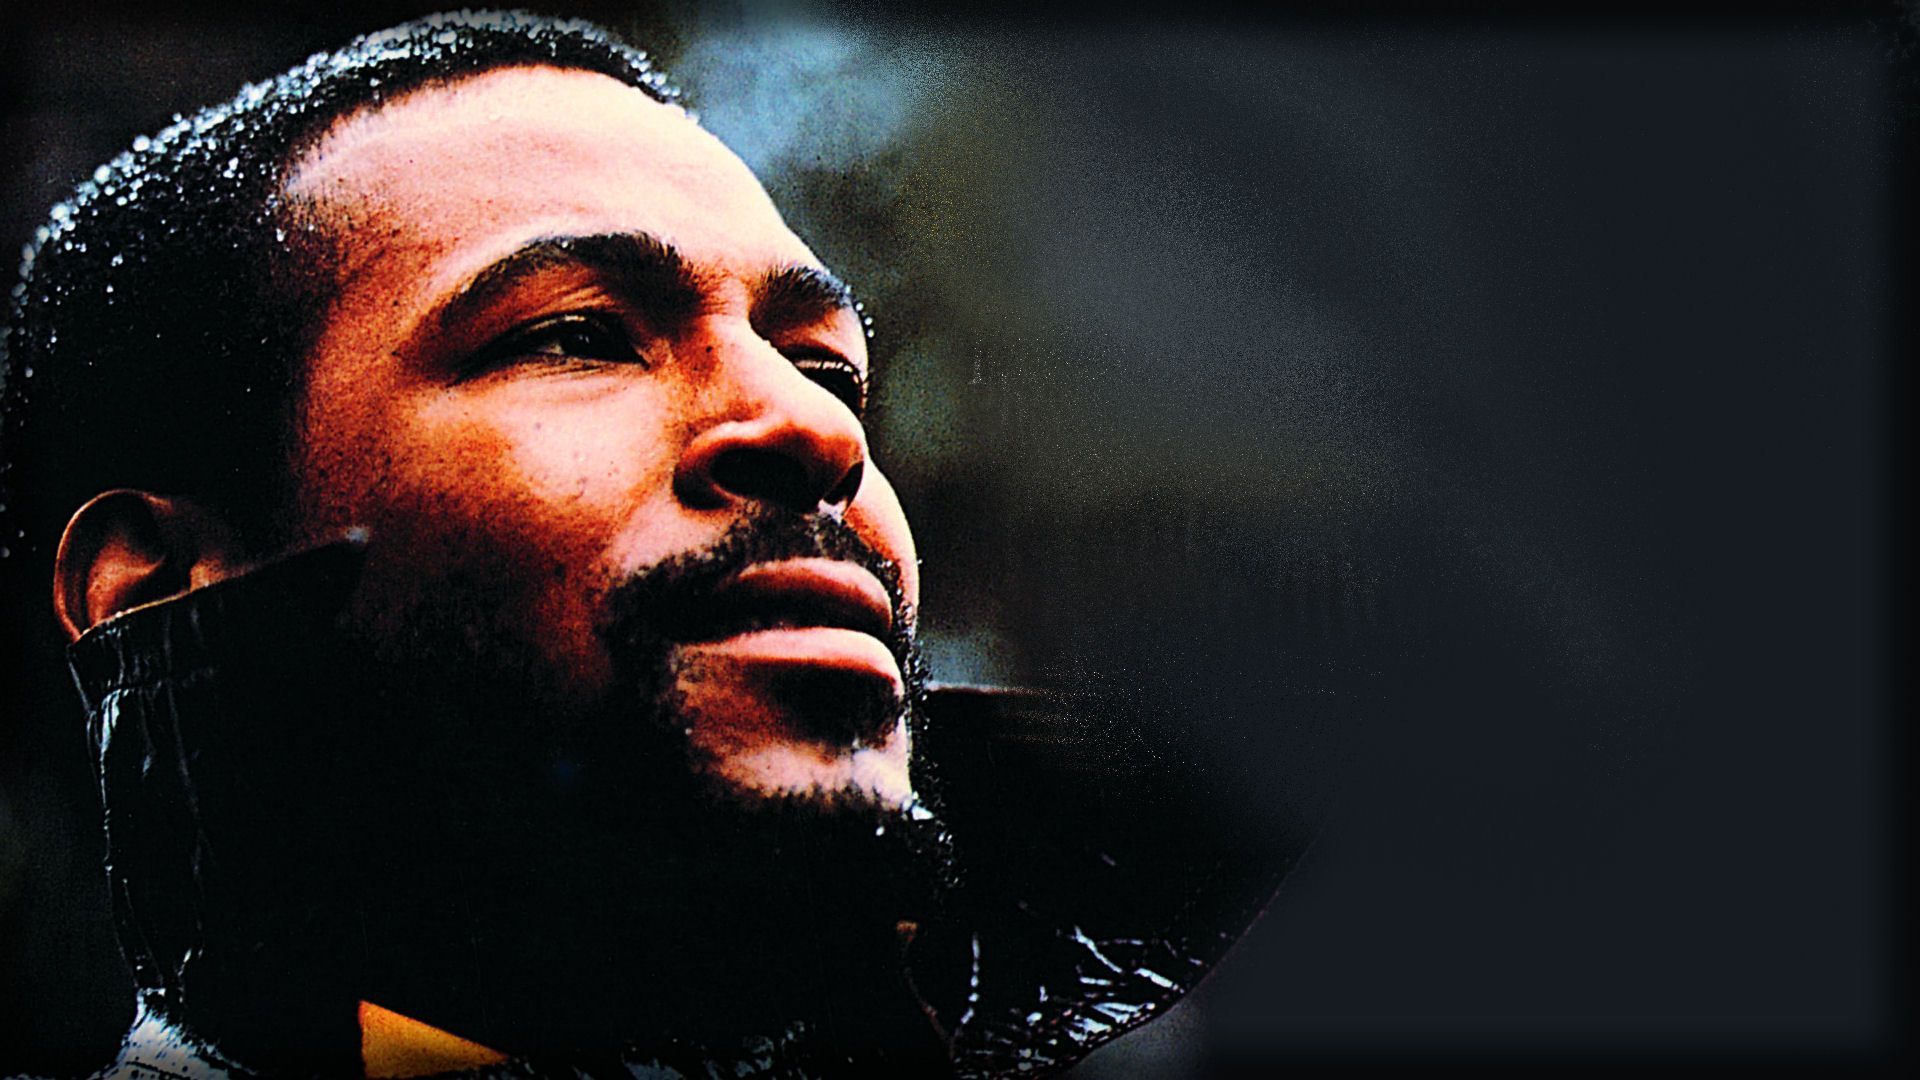 3 Marvin Gaye HD Wallpapers Backgrounds - Wallpaper Abyss